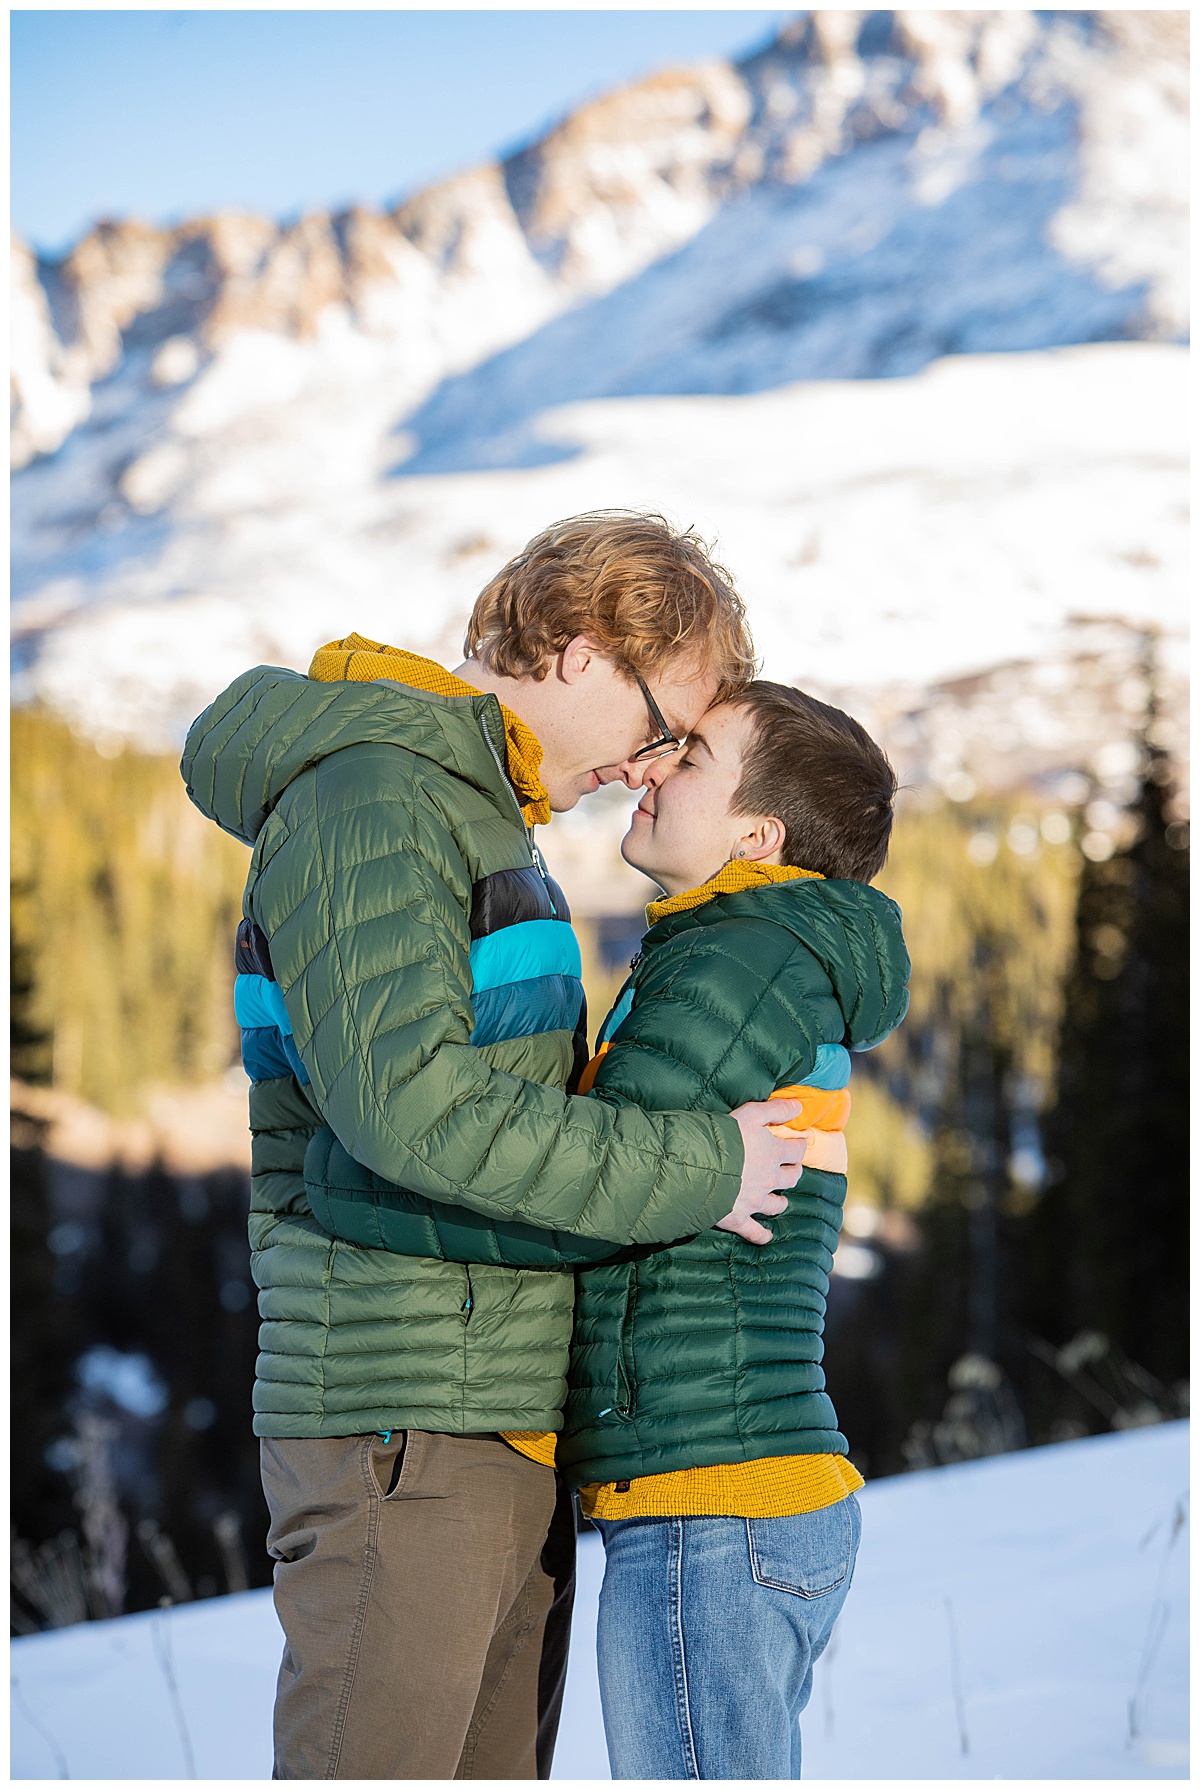 A couple poses in front of snow, mountains, and pine trees.